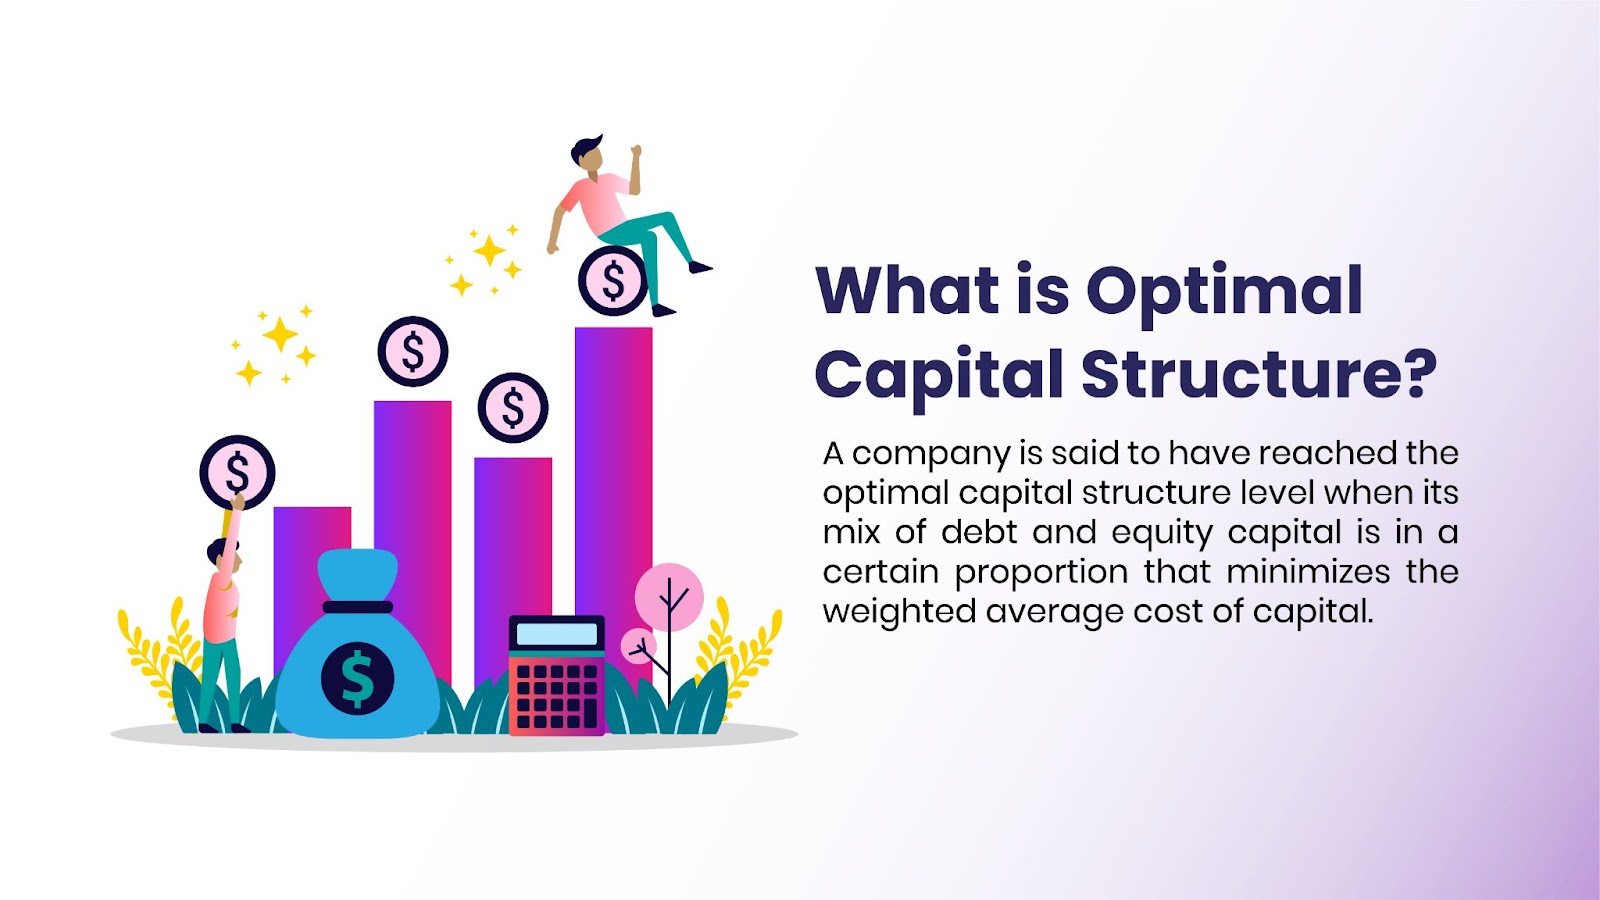 What is Optimal Capital Structure?